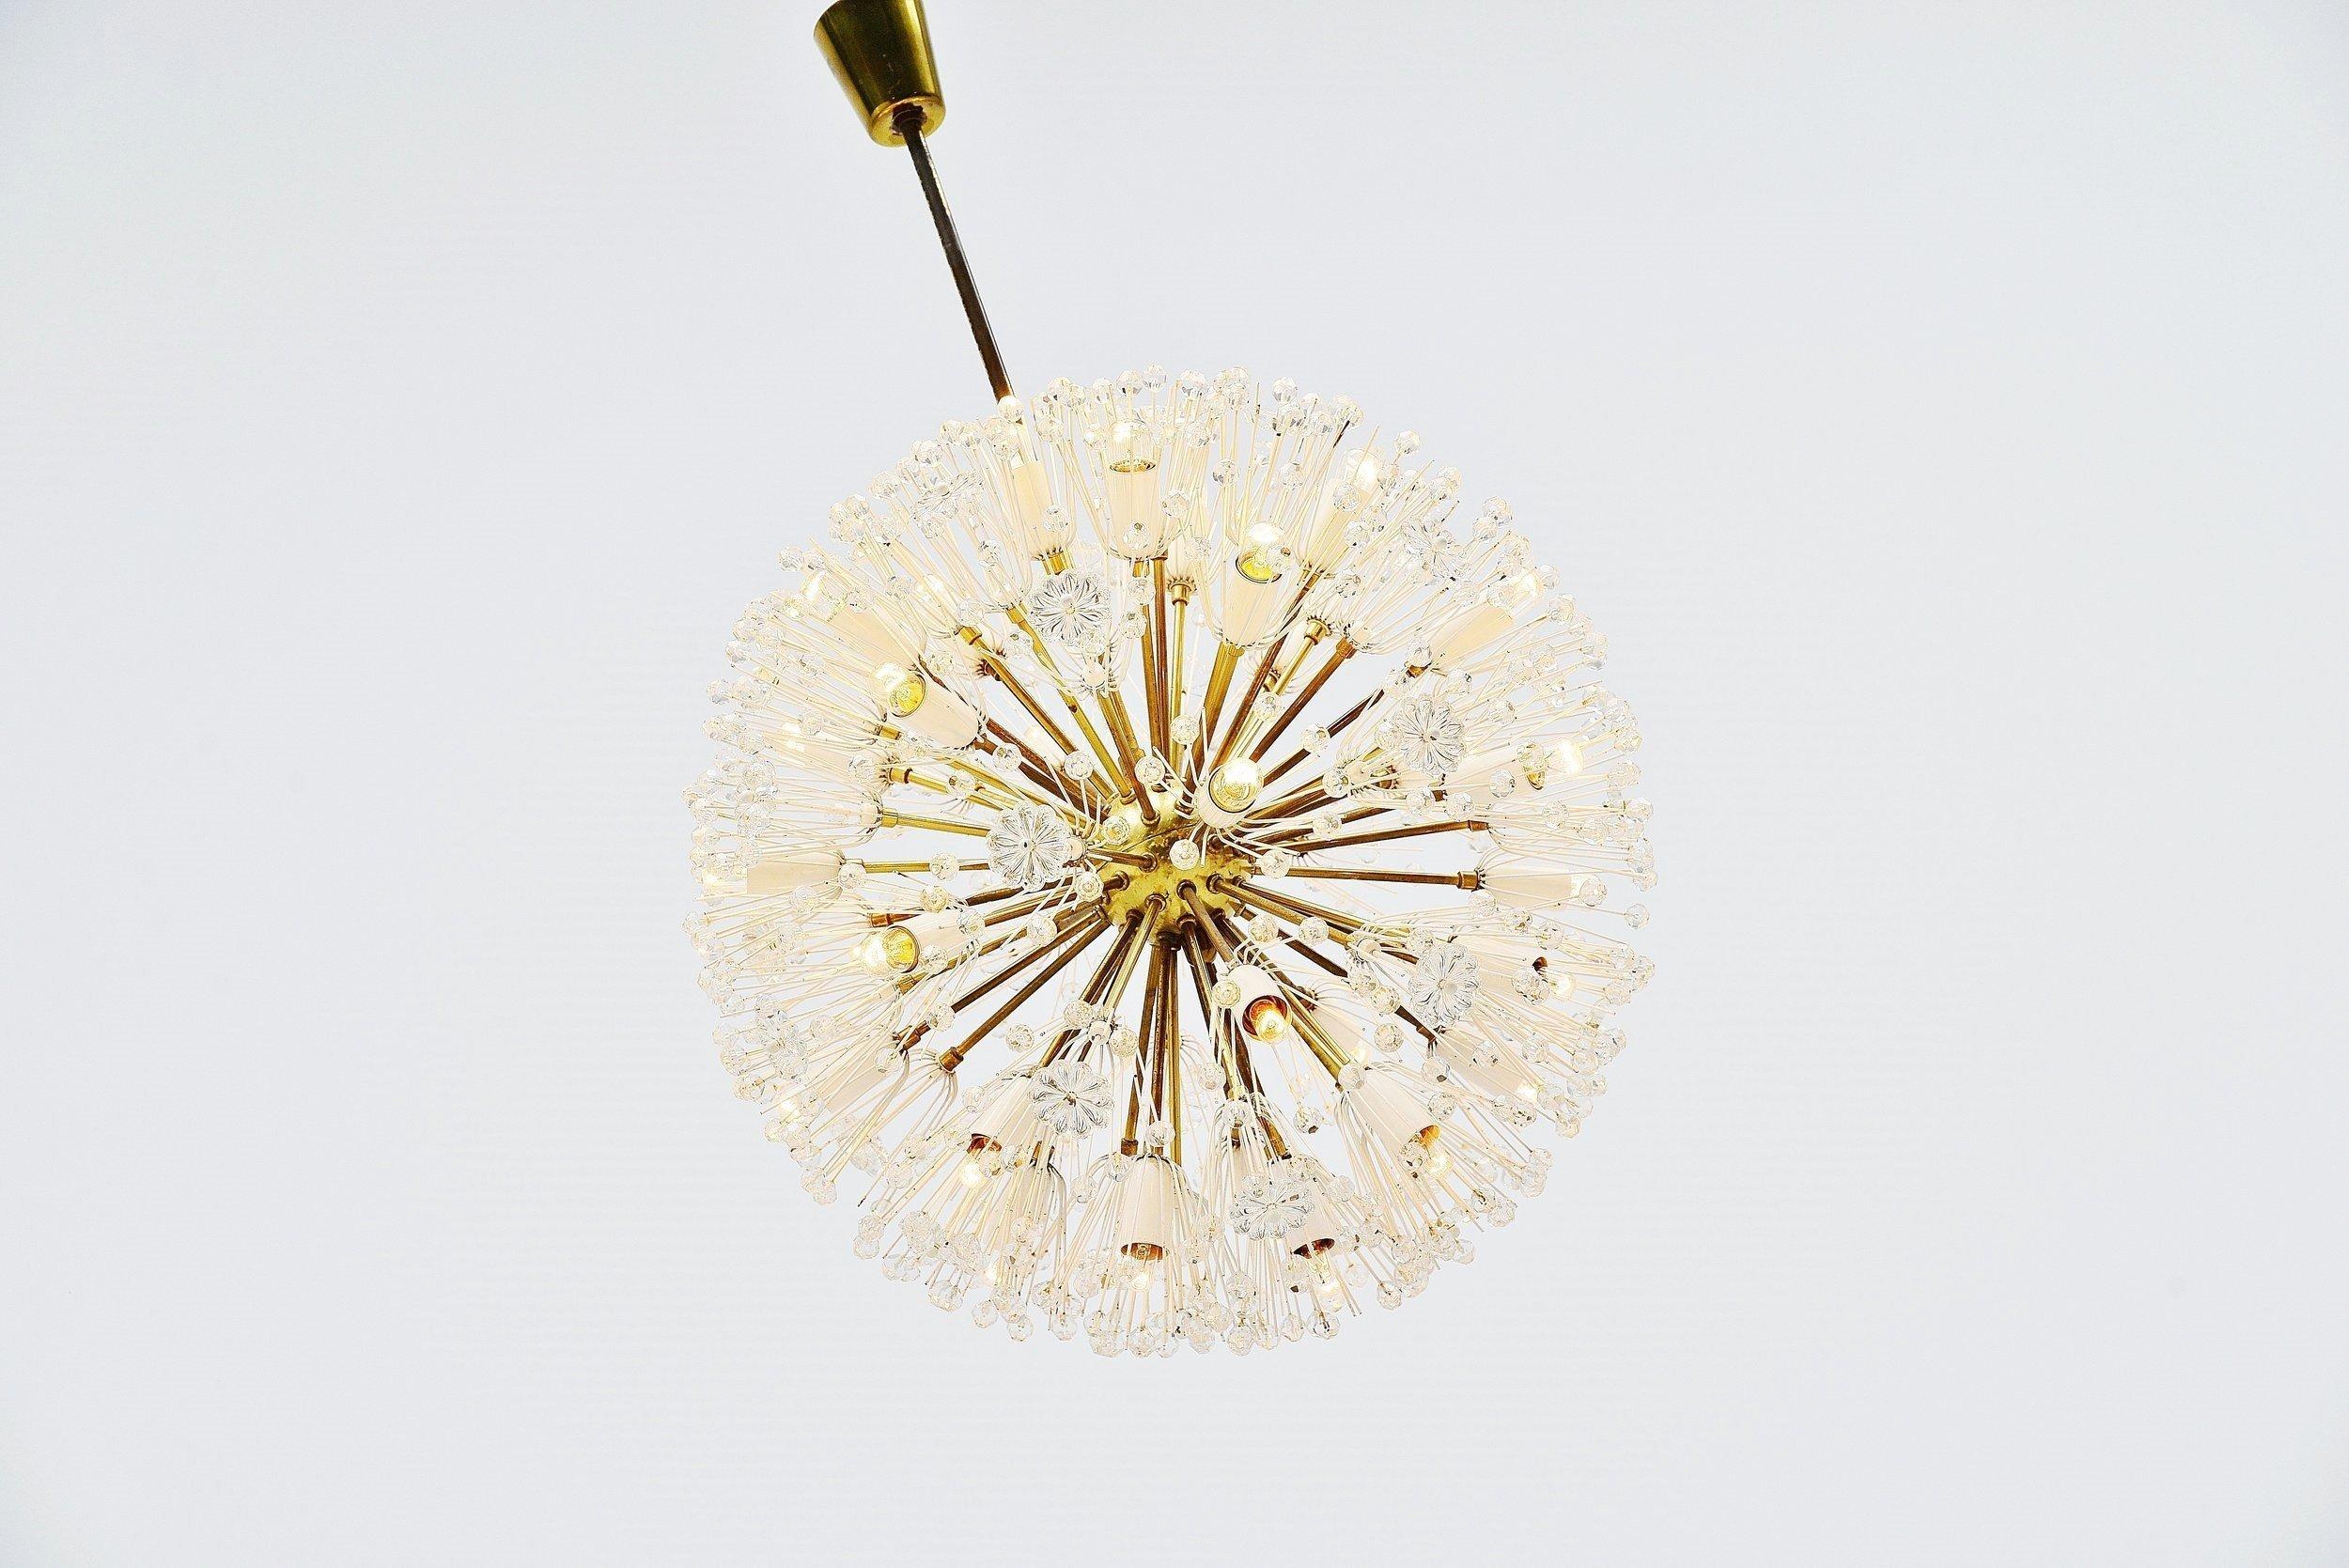 Stunning large chandelier designed by Emil Stejnar and manufactured by Rupert Nikoll, Austria, 1960. The chandelier has a brass structure and solid Chrystal snowflakes and flower shapes. The lamp gives fantastic light when lit and uses several E14